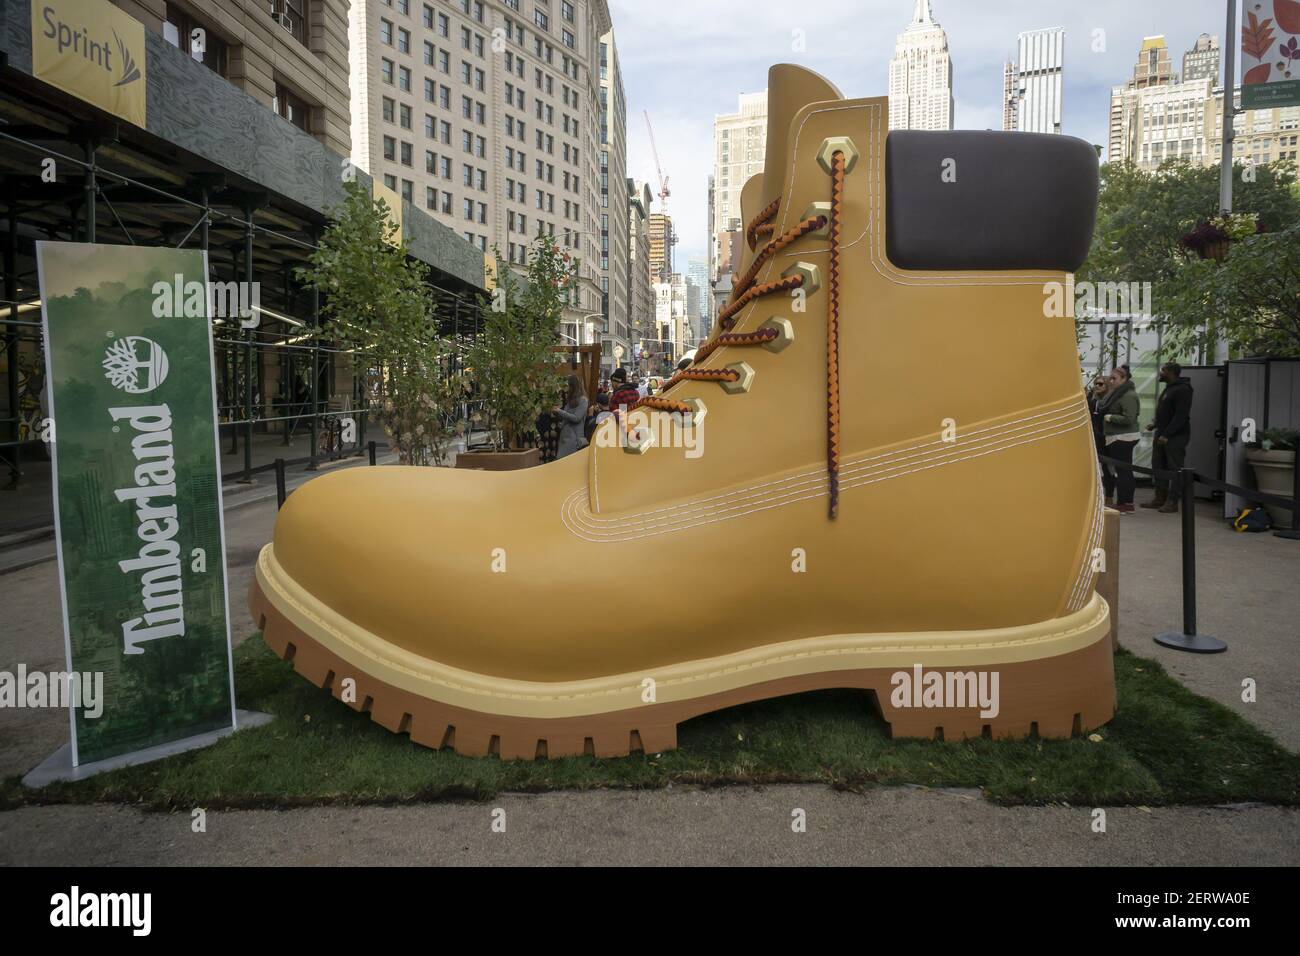 A giant Timberland boot attracts visitors to Flatiron Plaza in New York on Tuesday, October 16, 2018 where they can pot a free succulent a branding event for VF Corp.'s Timberland